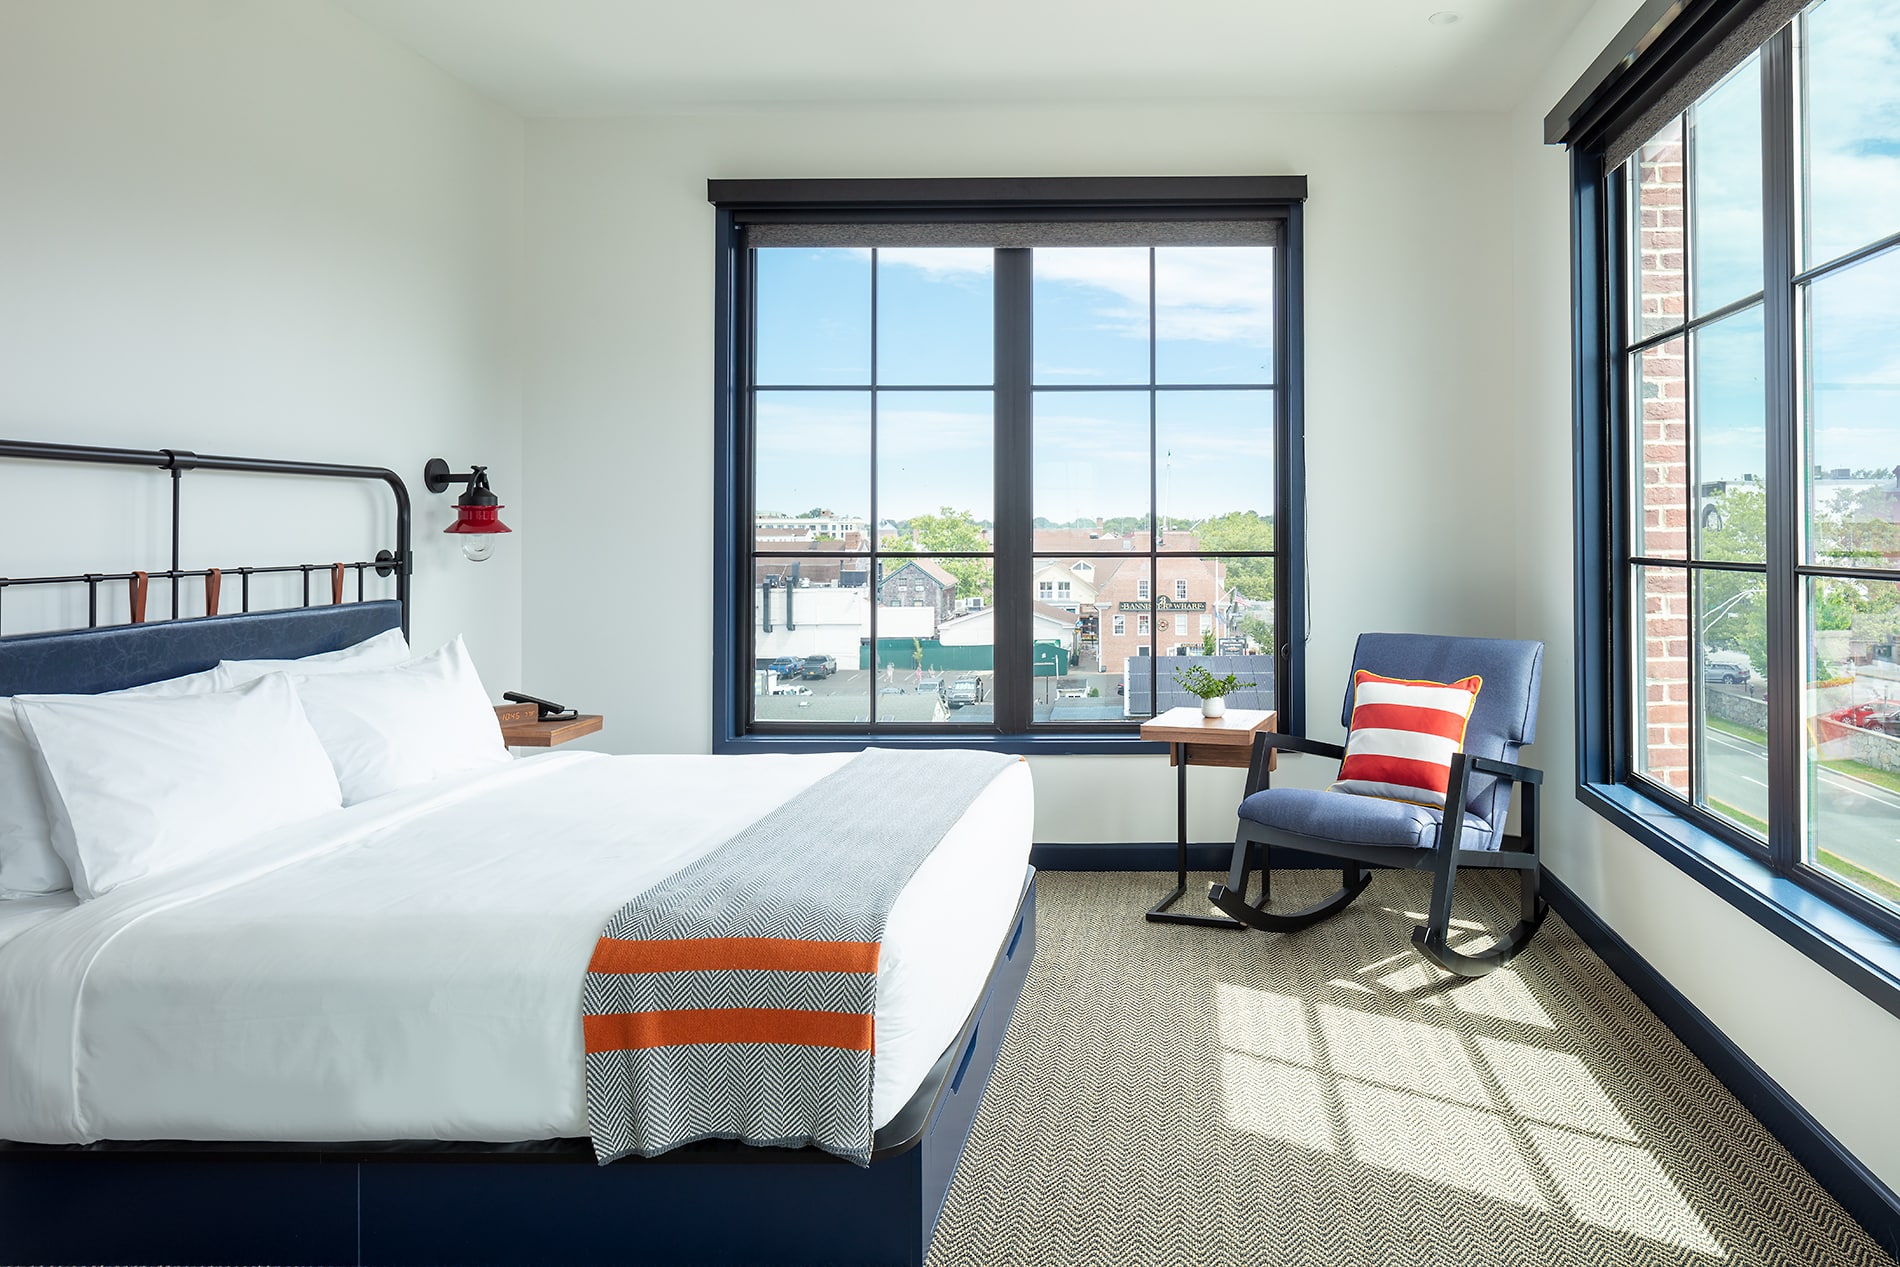 Modern hotel room in Newport RI featuring a large bed with striped blanket, a desk, a chair by the window, and a view of the cityscape outside.